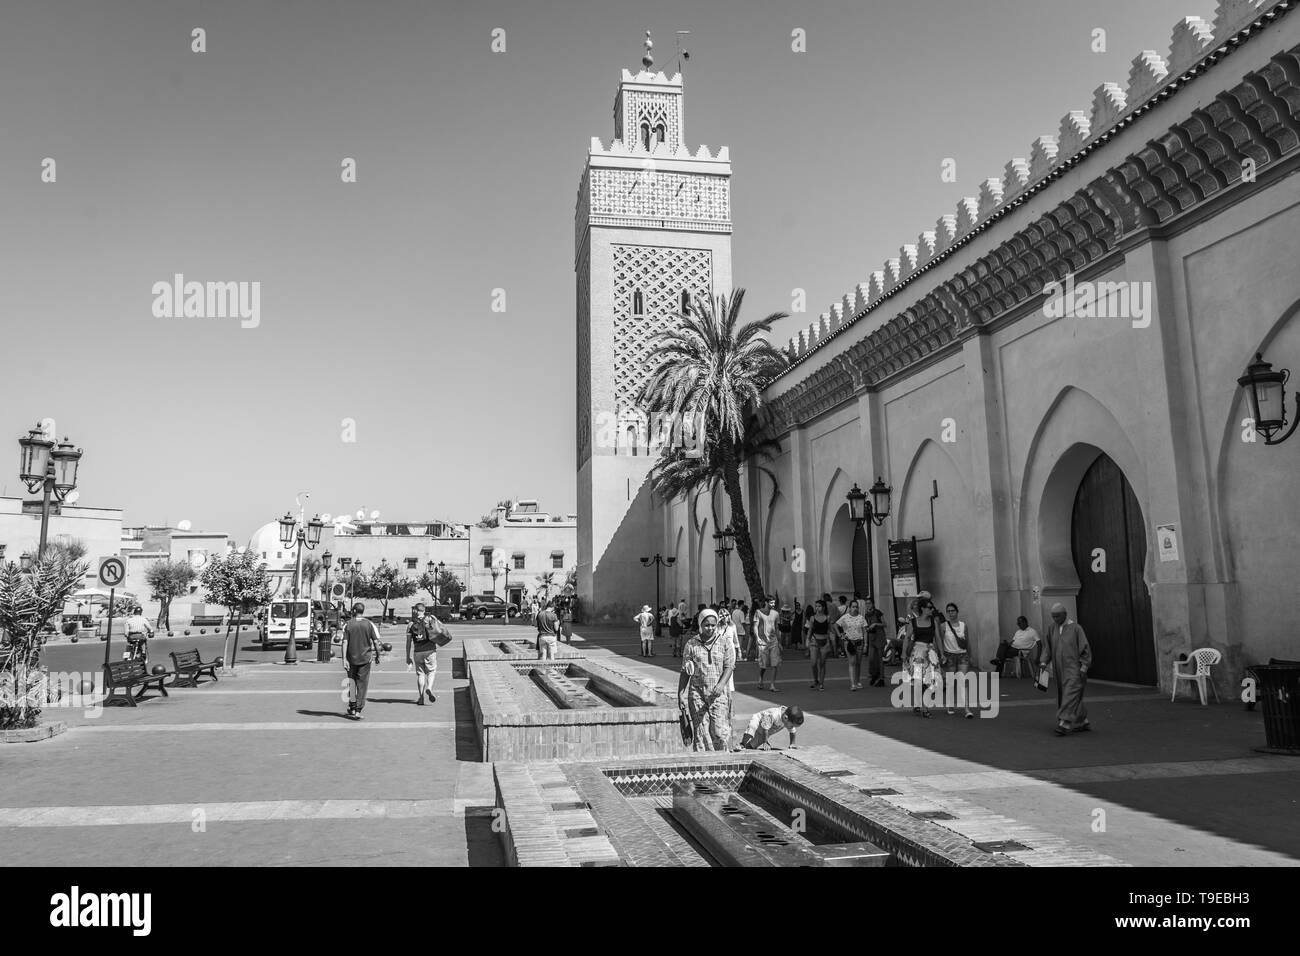 MARRAKECH, MOROCCO, 29 AUGUST 2018: Kasbah Mosque Stock Photo